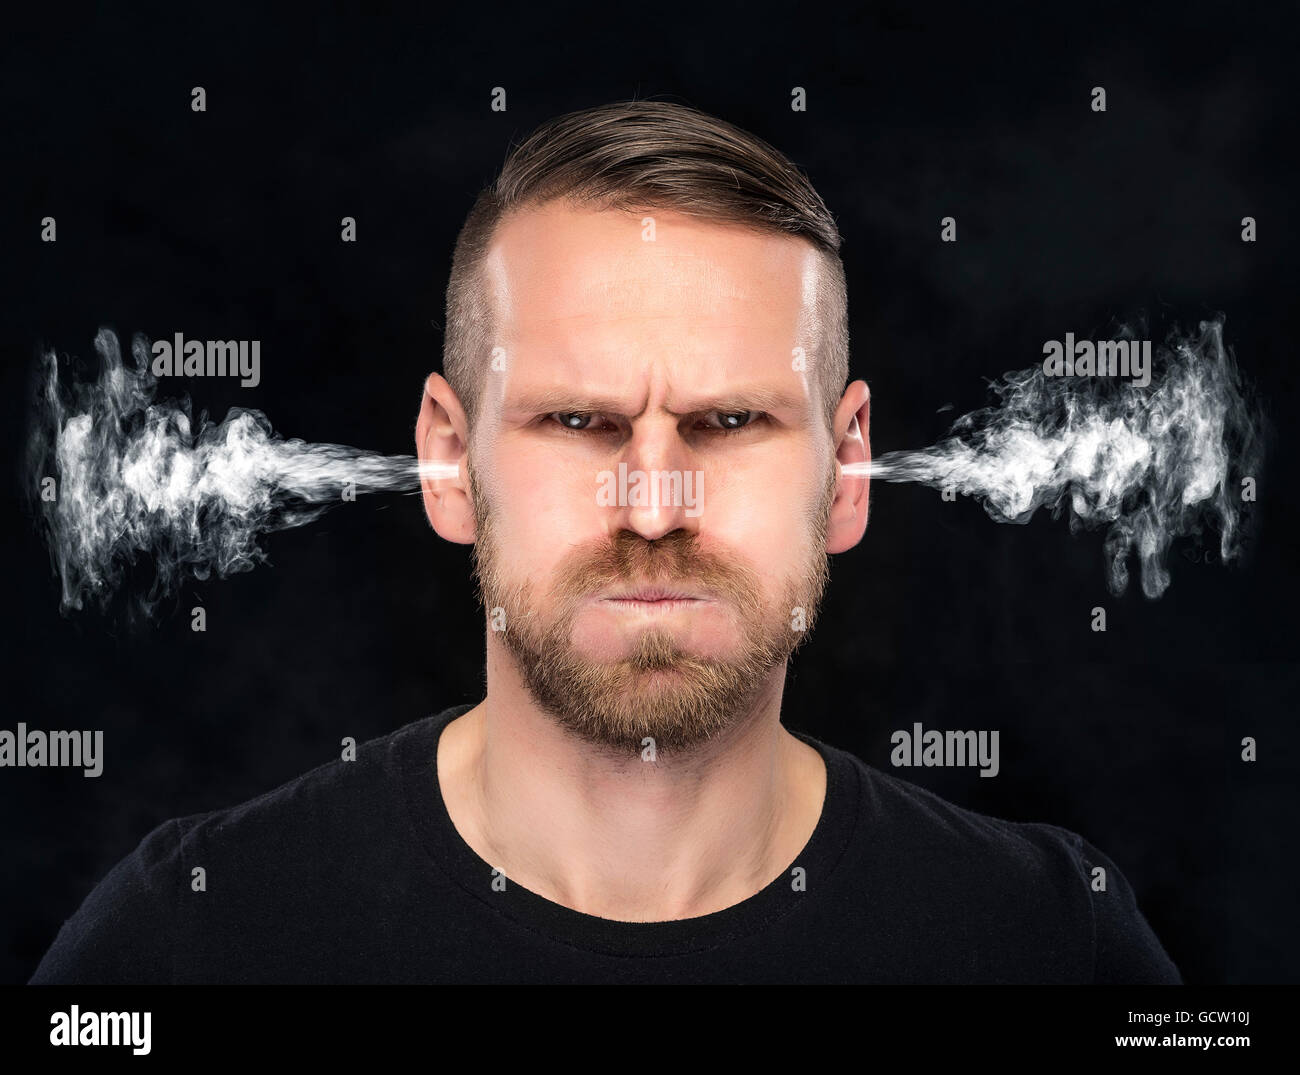 Angry man with smoke or fume coming out from his ears on dark background. Stock Photo